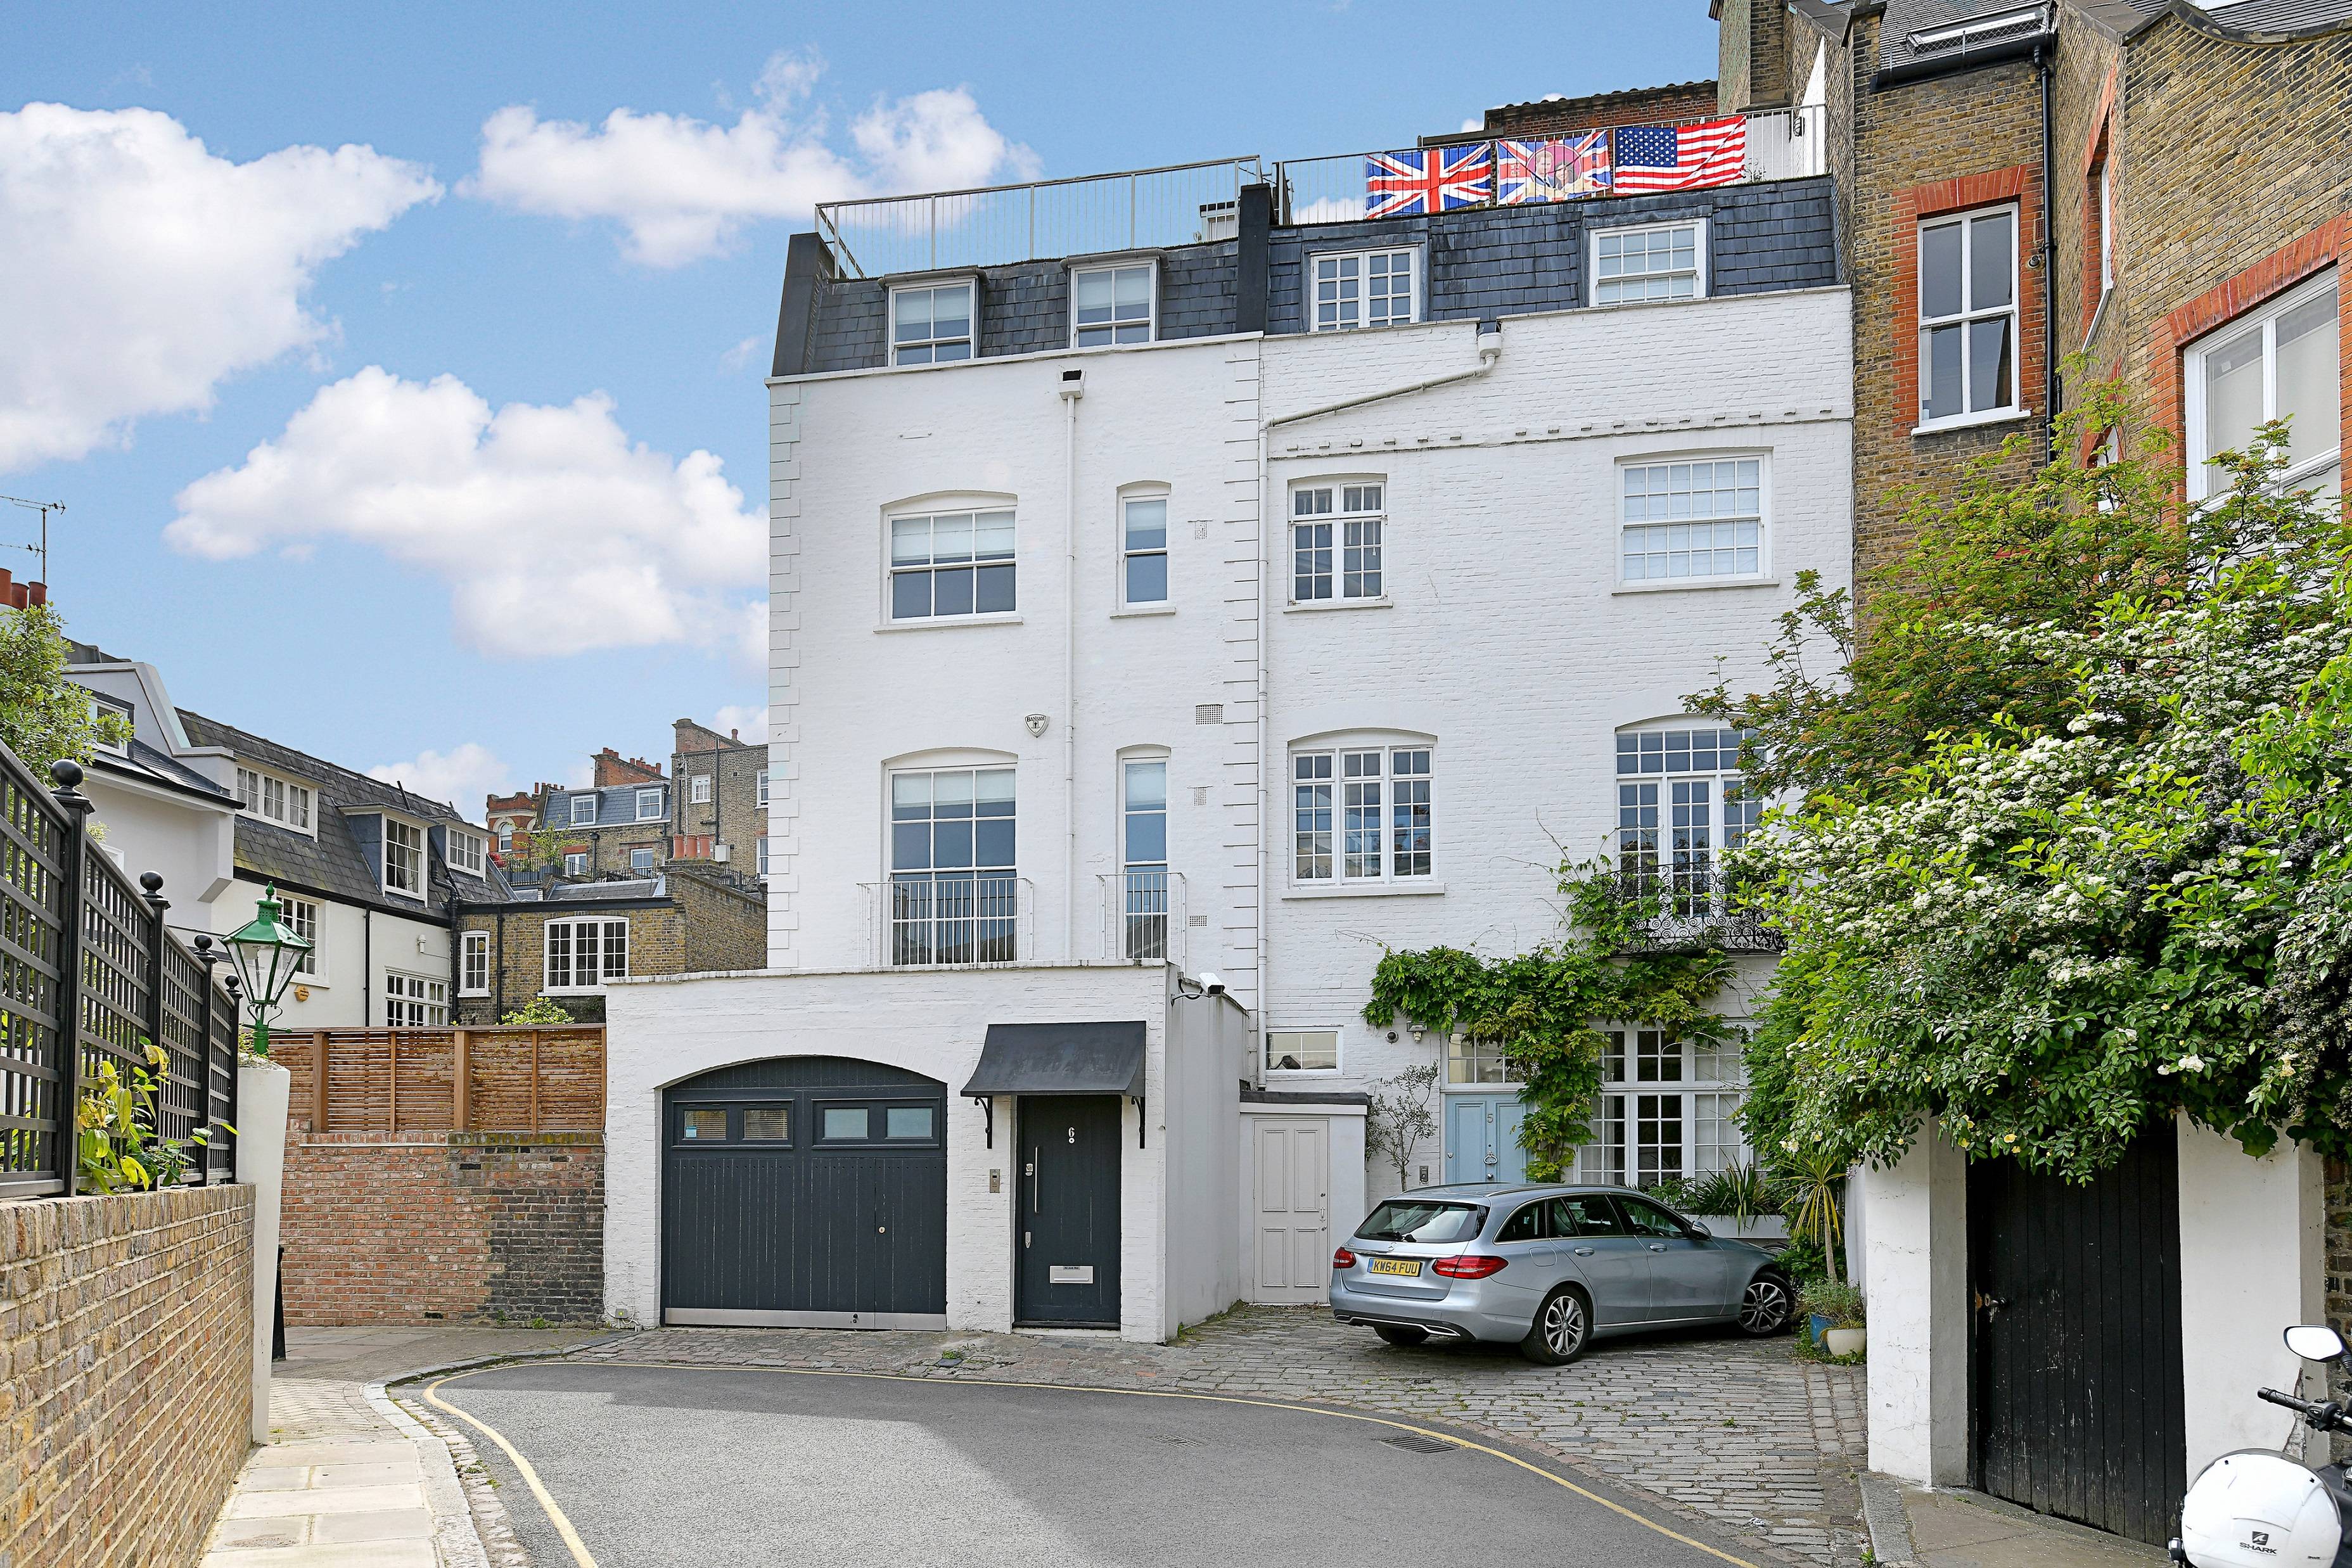 Pretty end of terrace 4 bedroom property with substantial roof terrace  in prime Kensington, W8